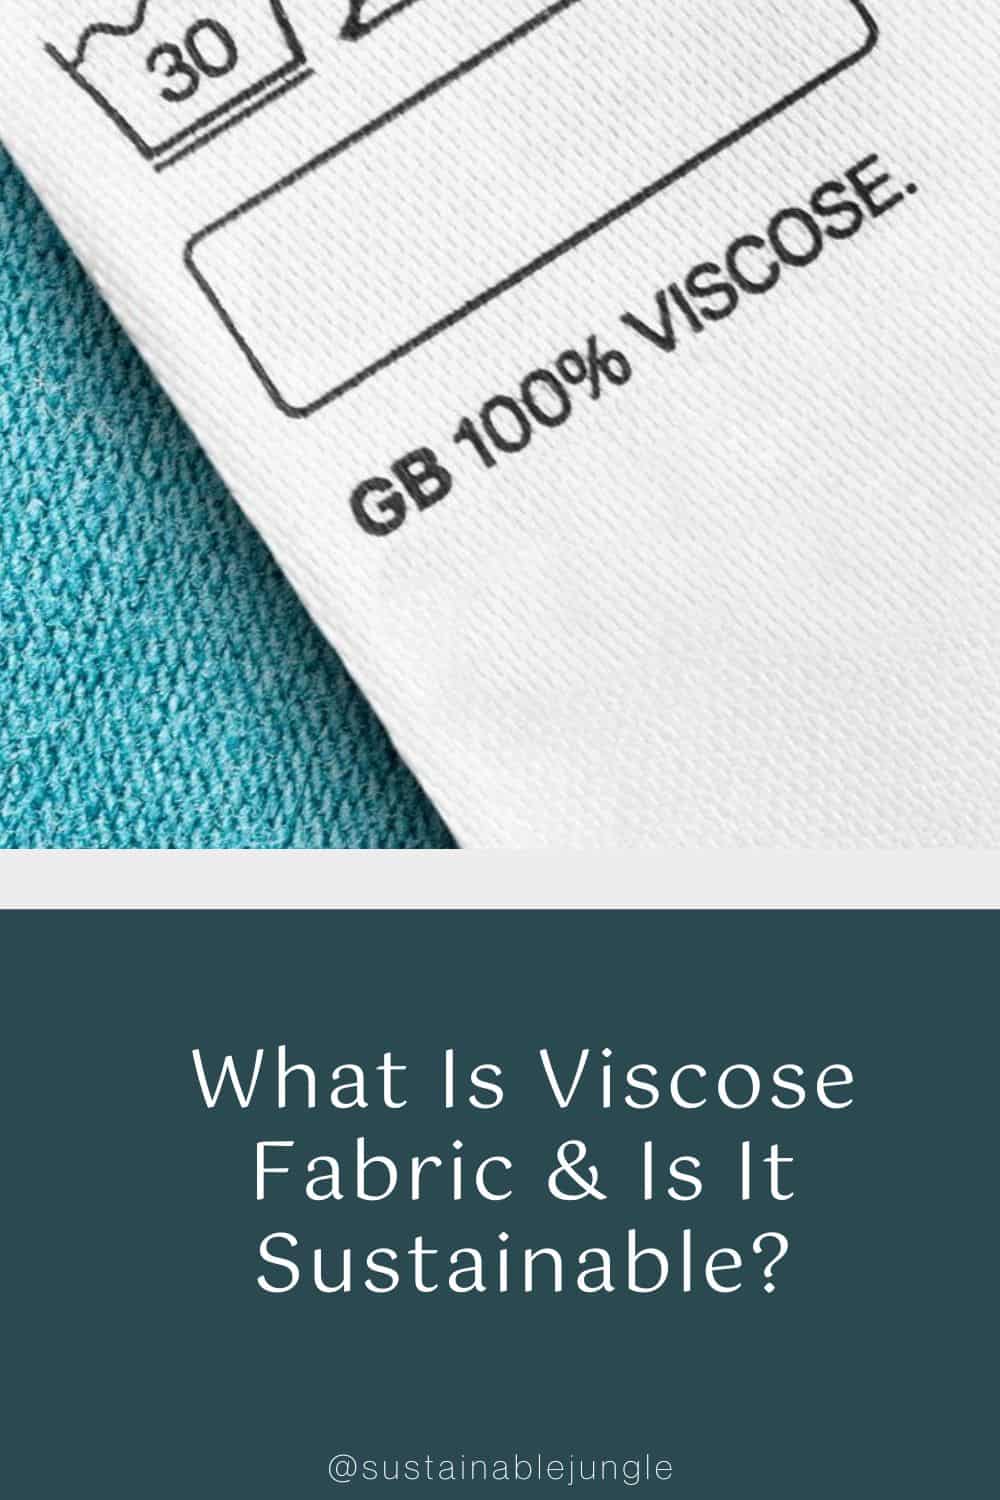 What Is Viscose Fabric & Is It Sustainable? Image by Tarzhanova via Getty Images on Canva Pro #viscosefabric #whatisviscosefabric #isviscosesustainable #viscosesustainability #isviscoseecofriendly #viscosfabricprosandcons #sustainablejungle